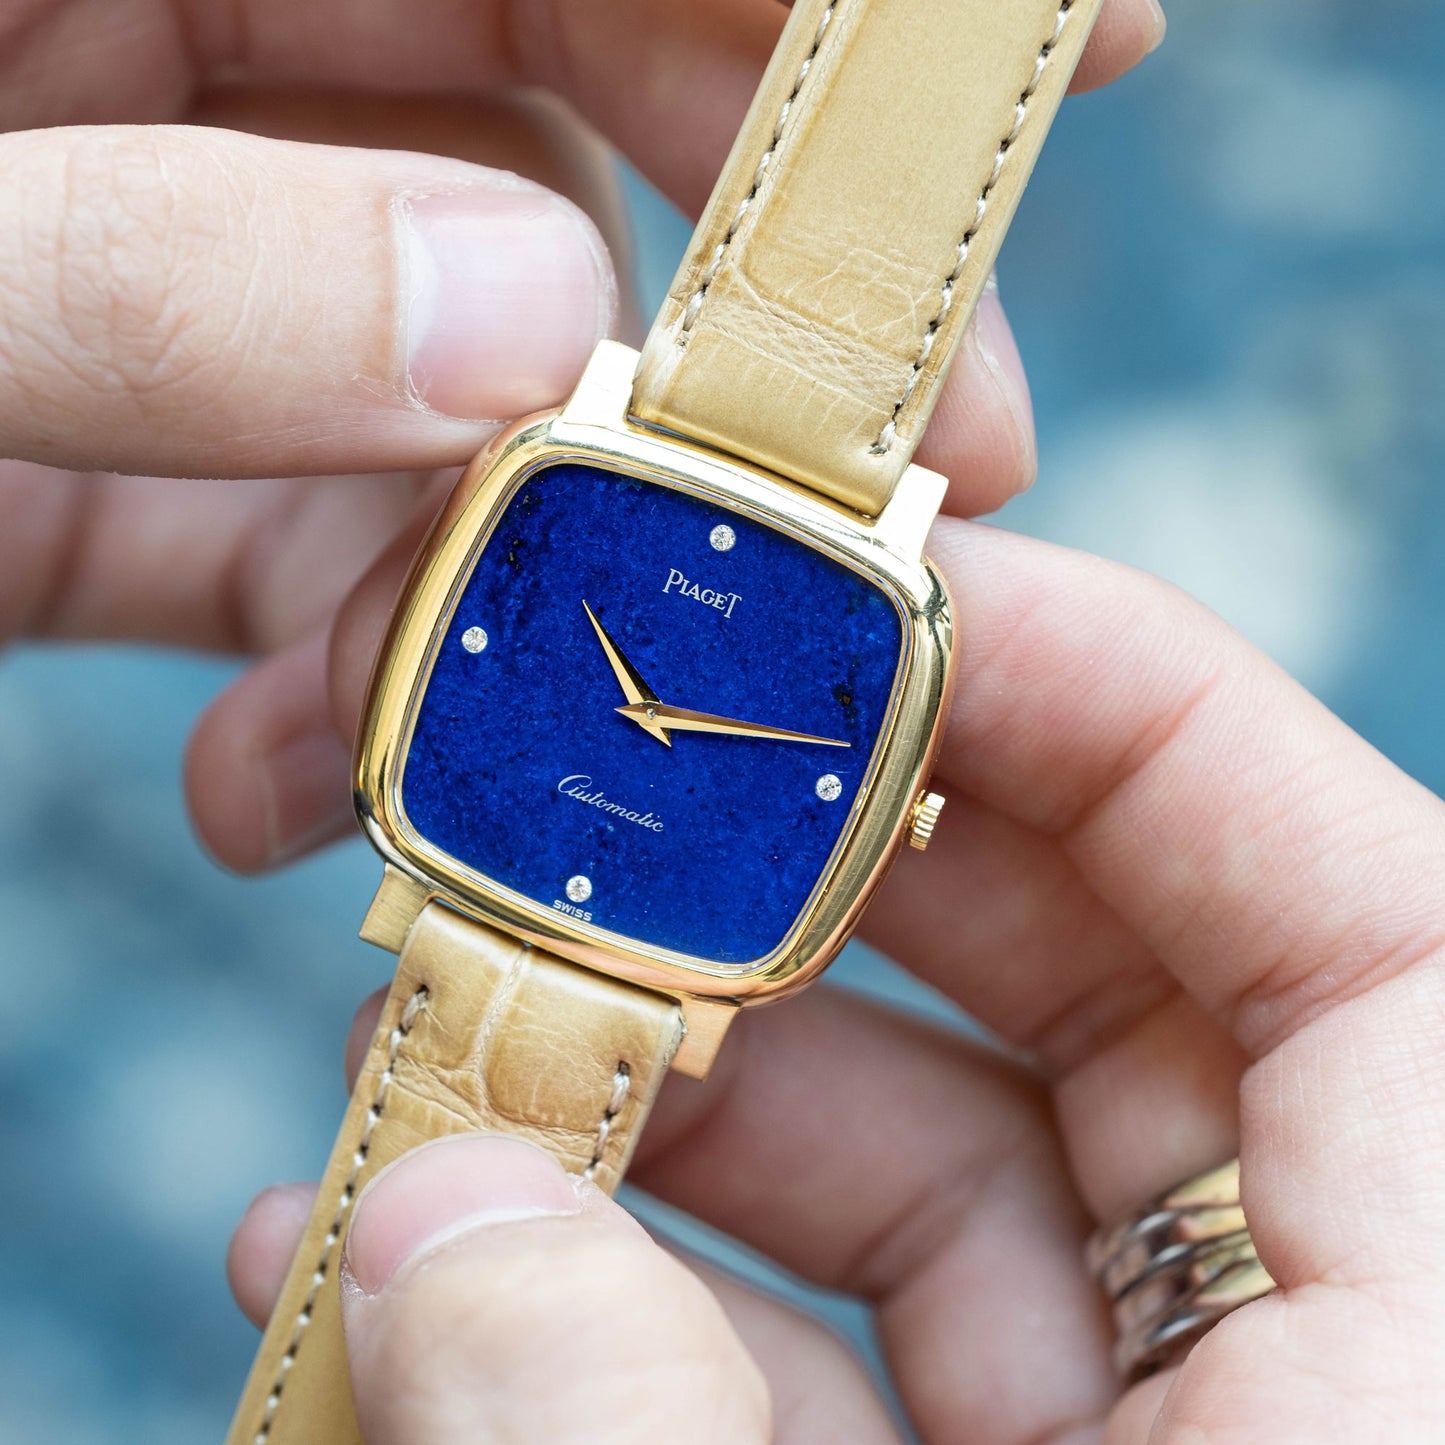 Piaget Cushion 18k Lapis Lazuli Stone Dial cal.12P Automatic from 1970s